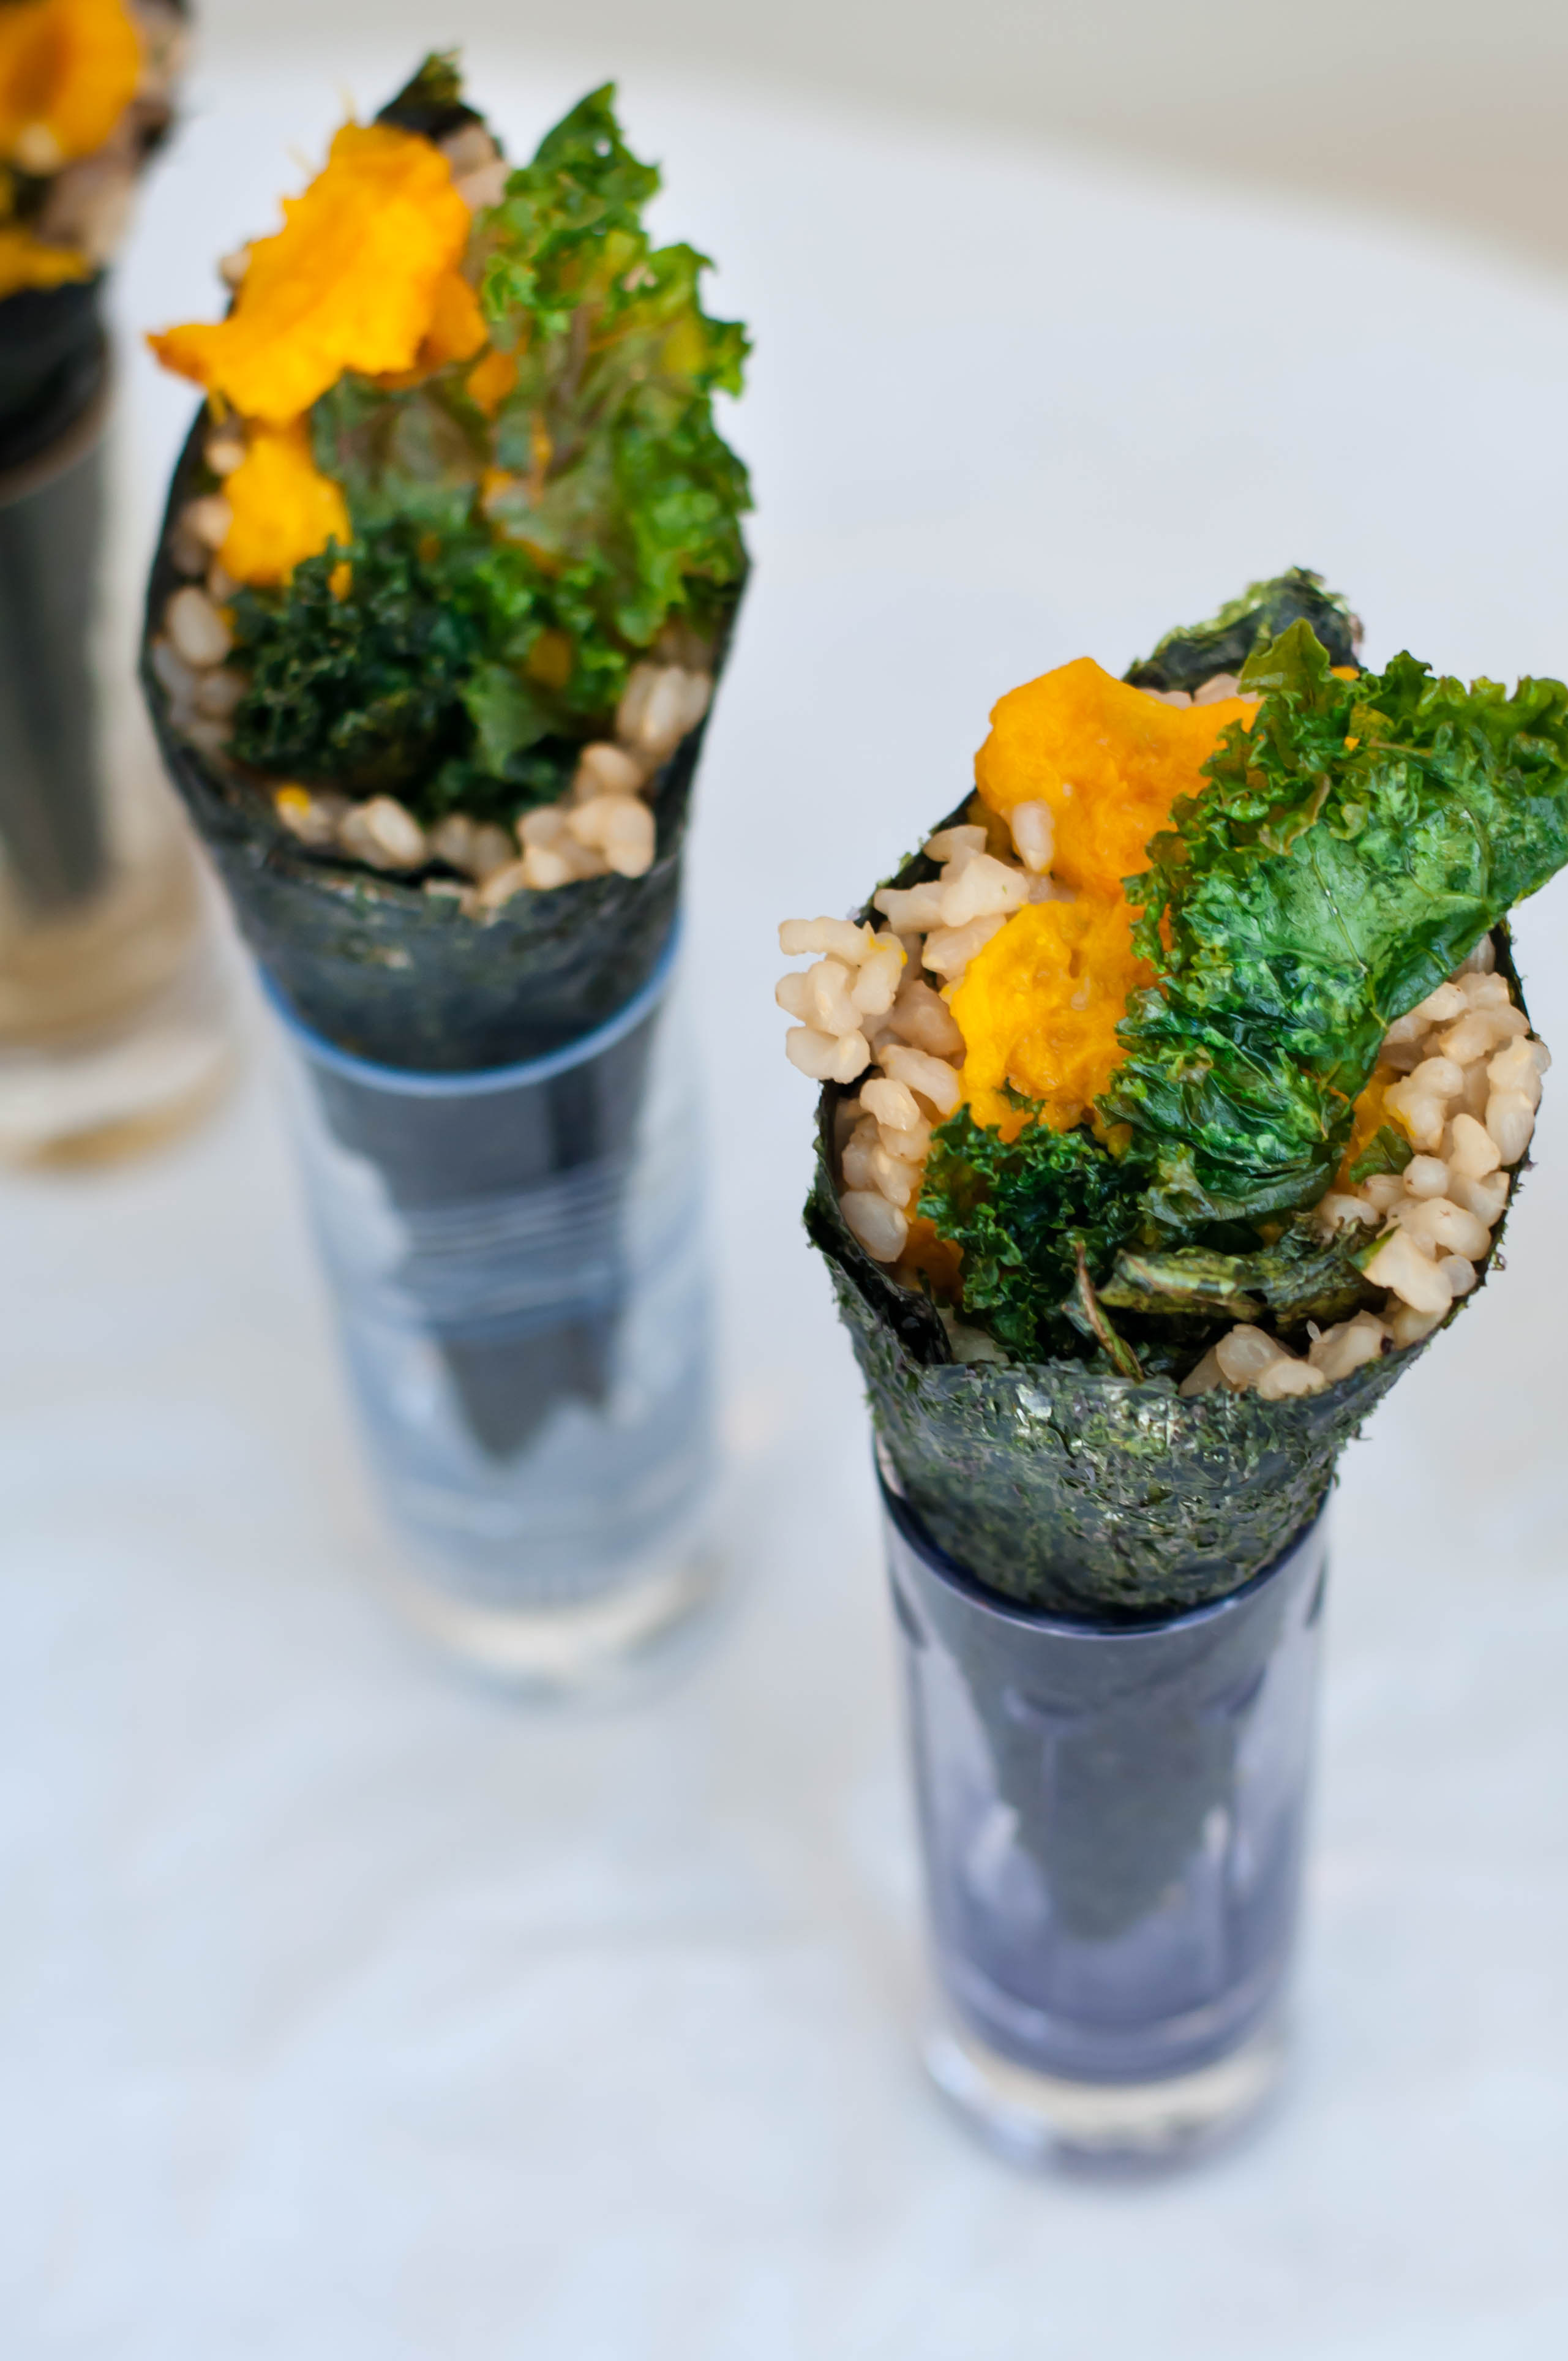 Japanese Pumpkin Temaki With Ginger Kale Chips - The Scratch Artist